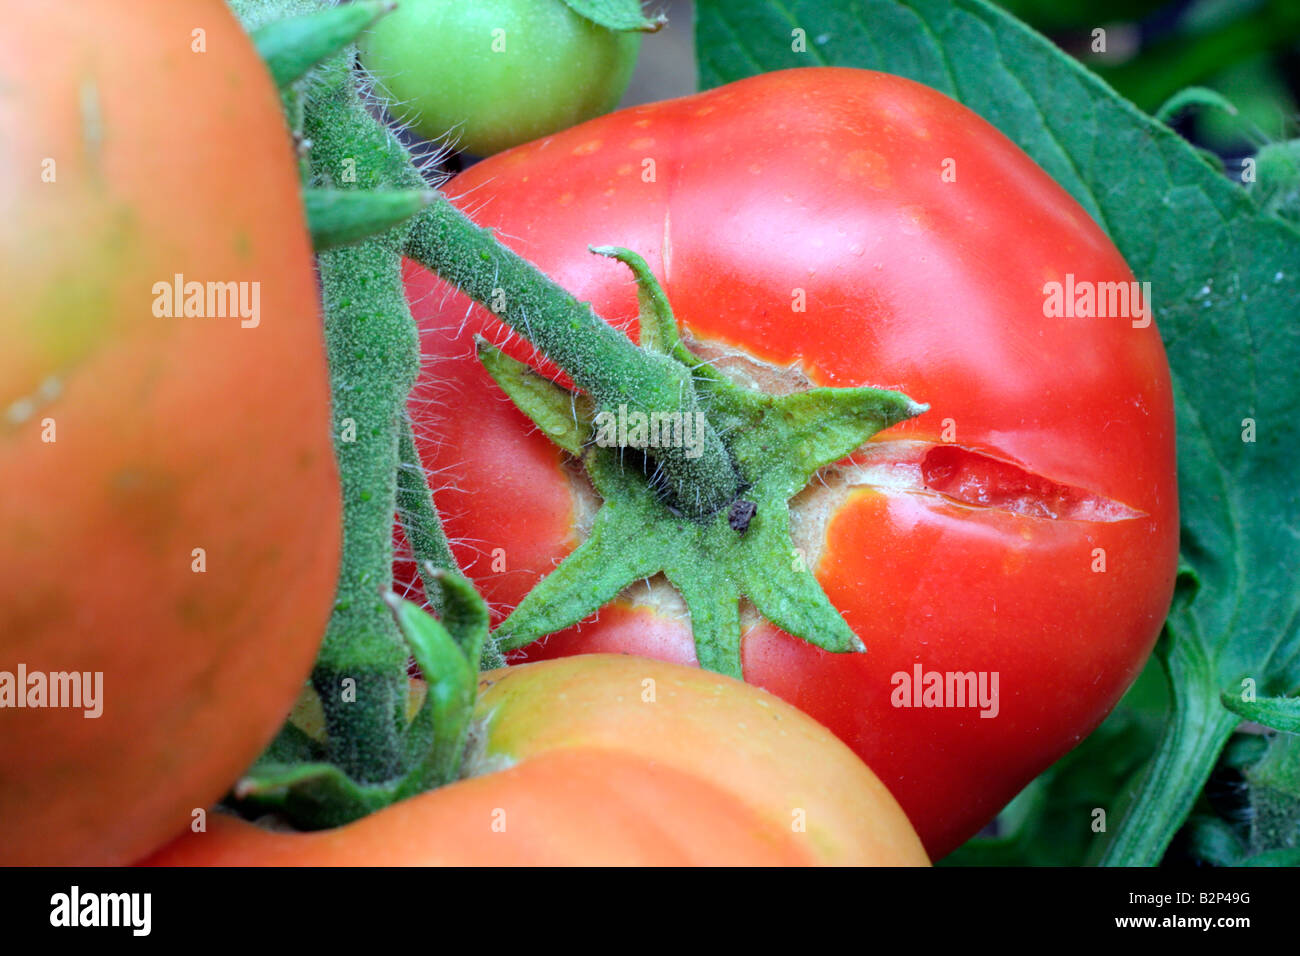 SOLANUM LYCOPERSICUM TOMATO LEGEND SHOWING CRACKING OF FRUITS CAUSED BY FLUCTUATING MOSITURE LEVELS Stock Photo